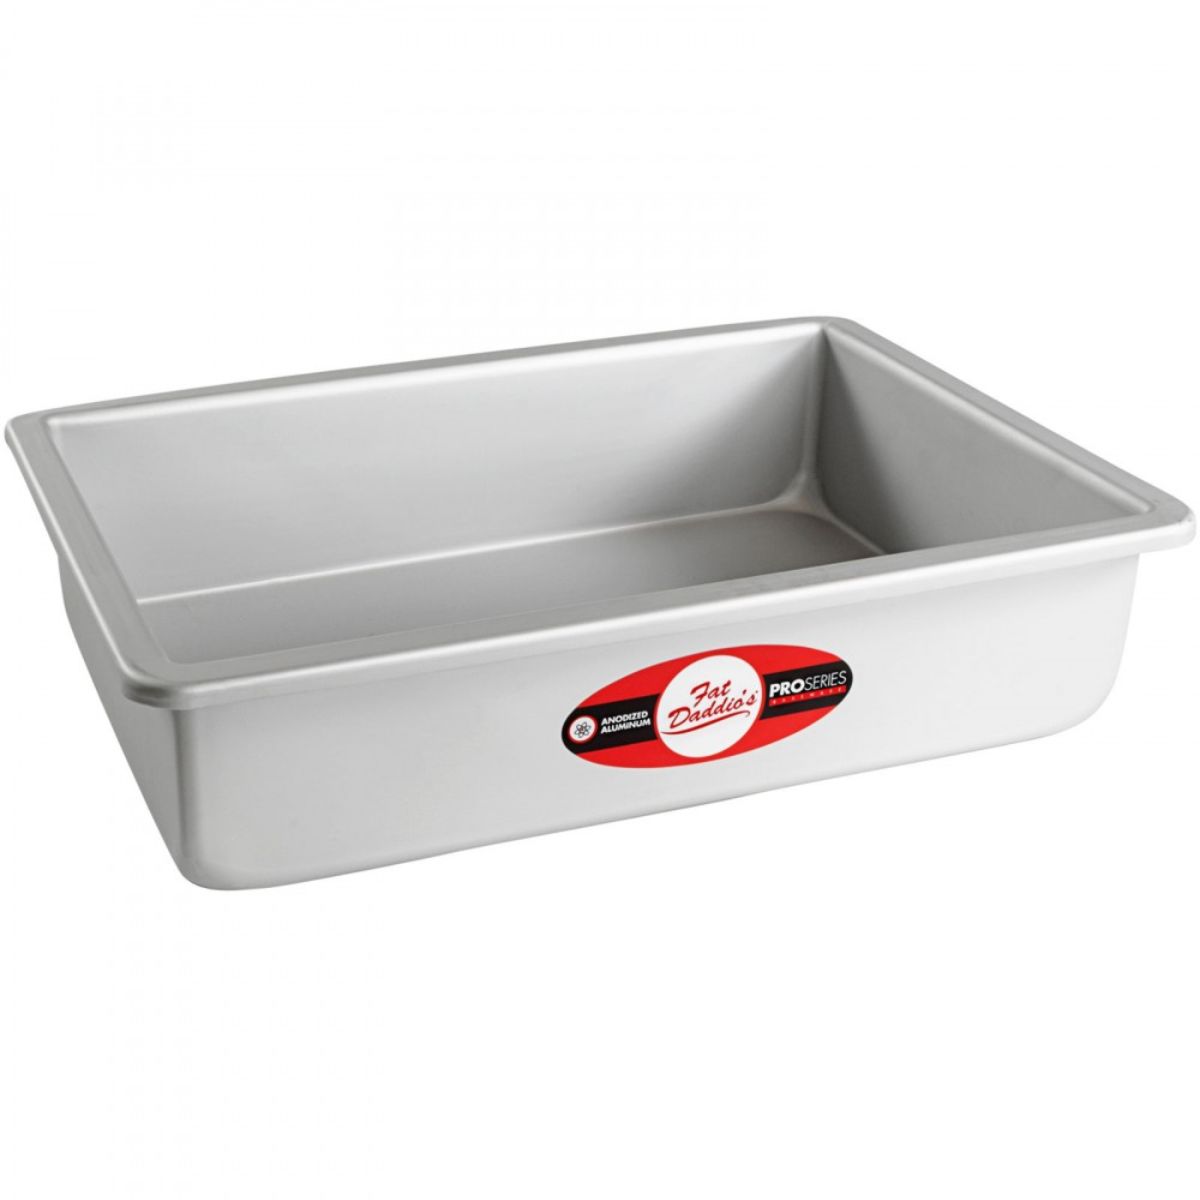 Fat Daddio's PSF-63 ProSeries 6 x 3 Anodized Aluminum Springform Cake Pan